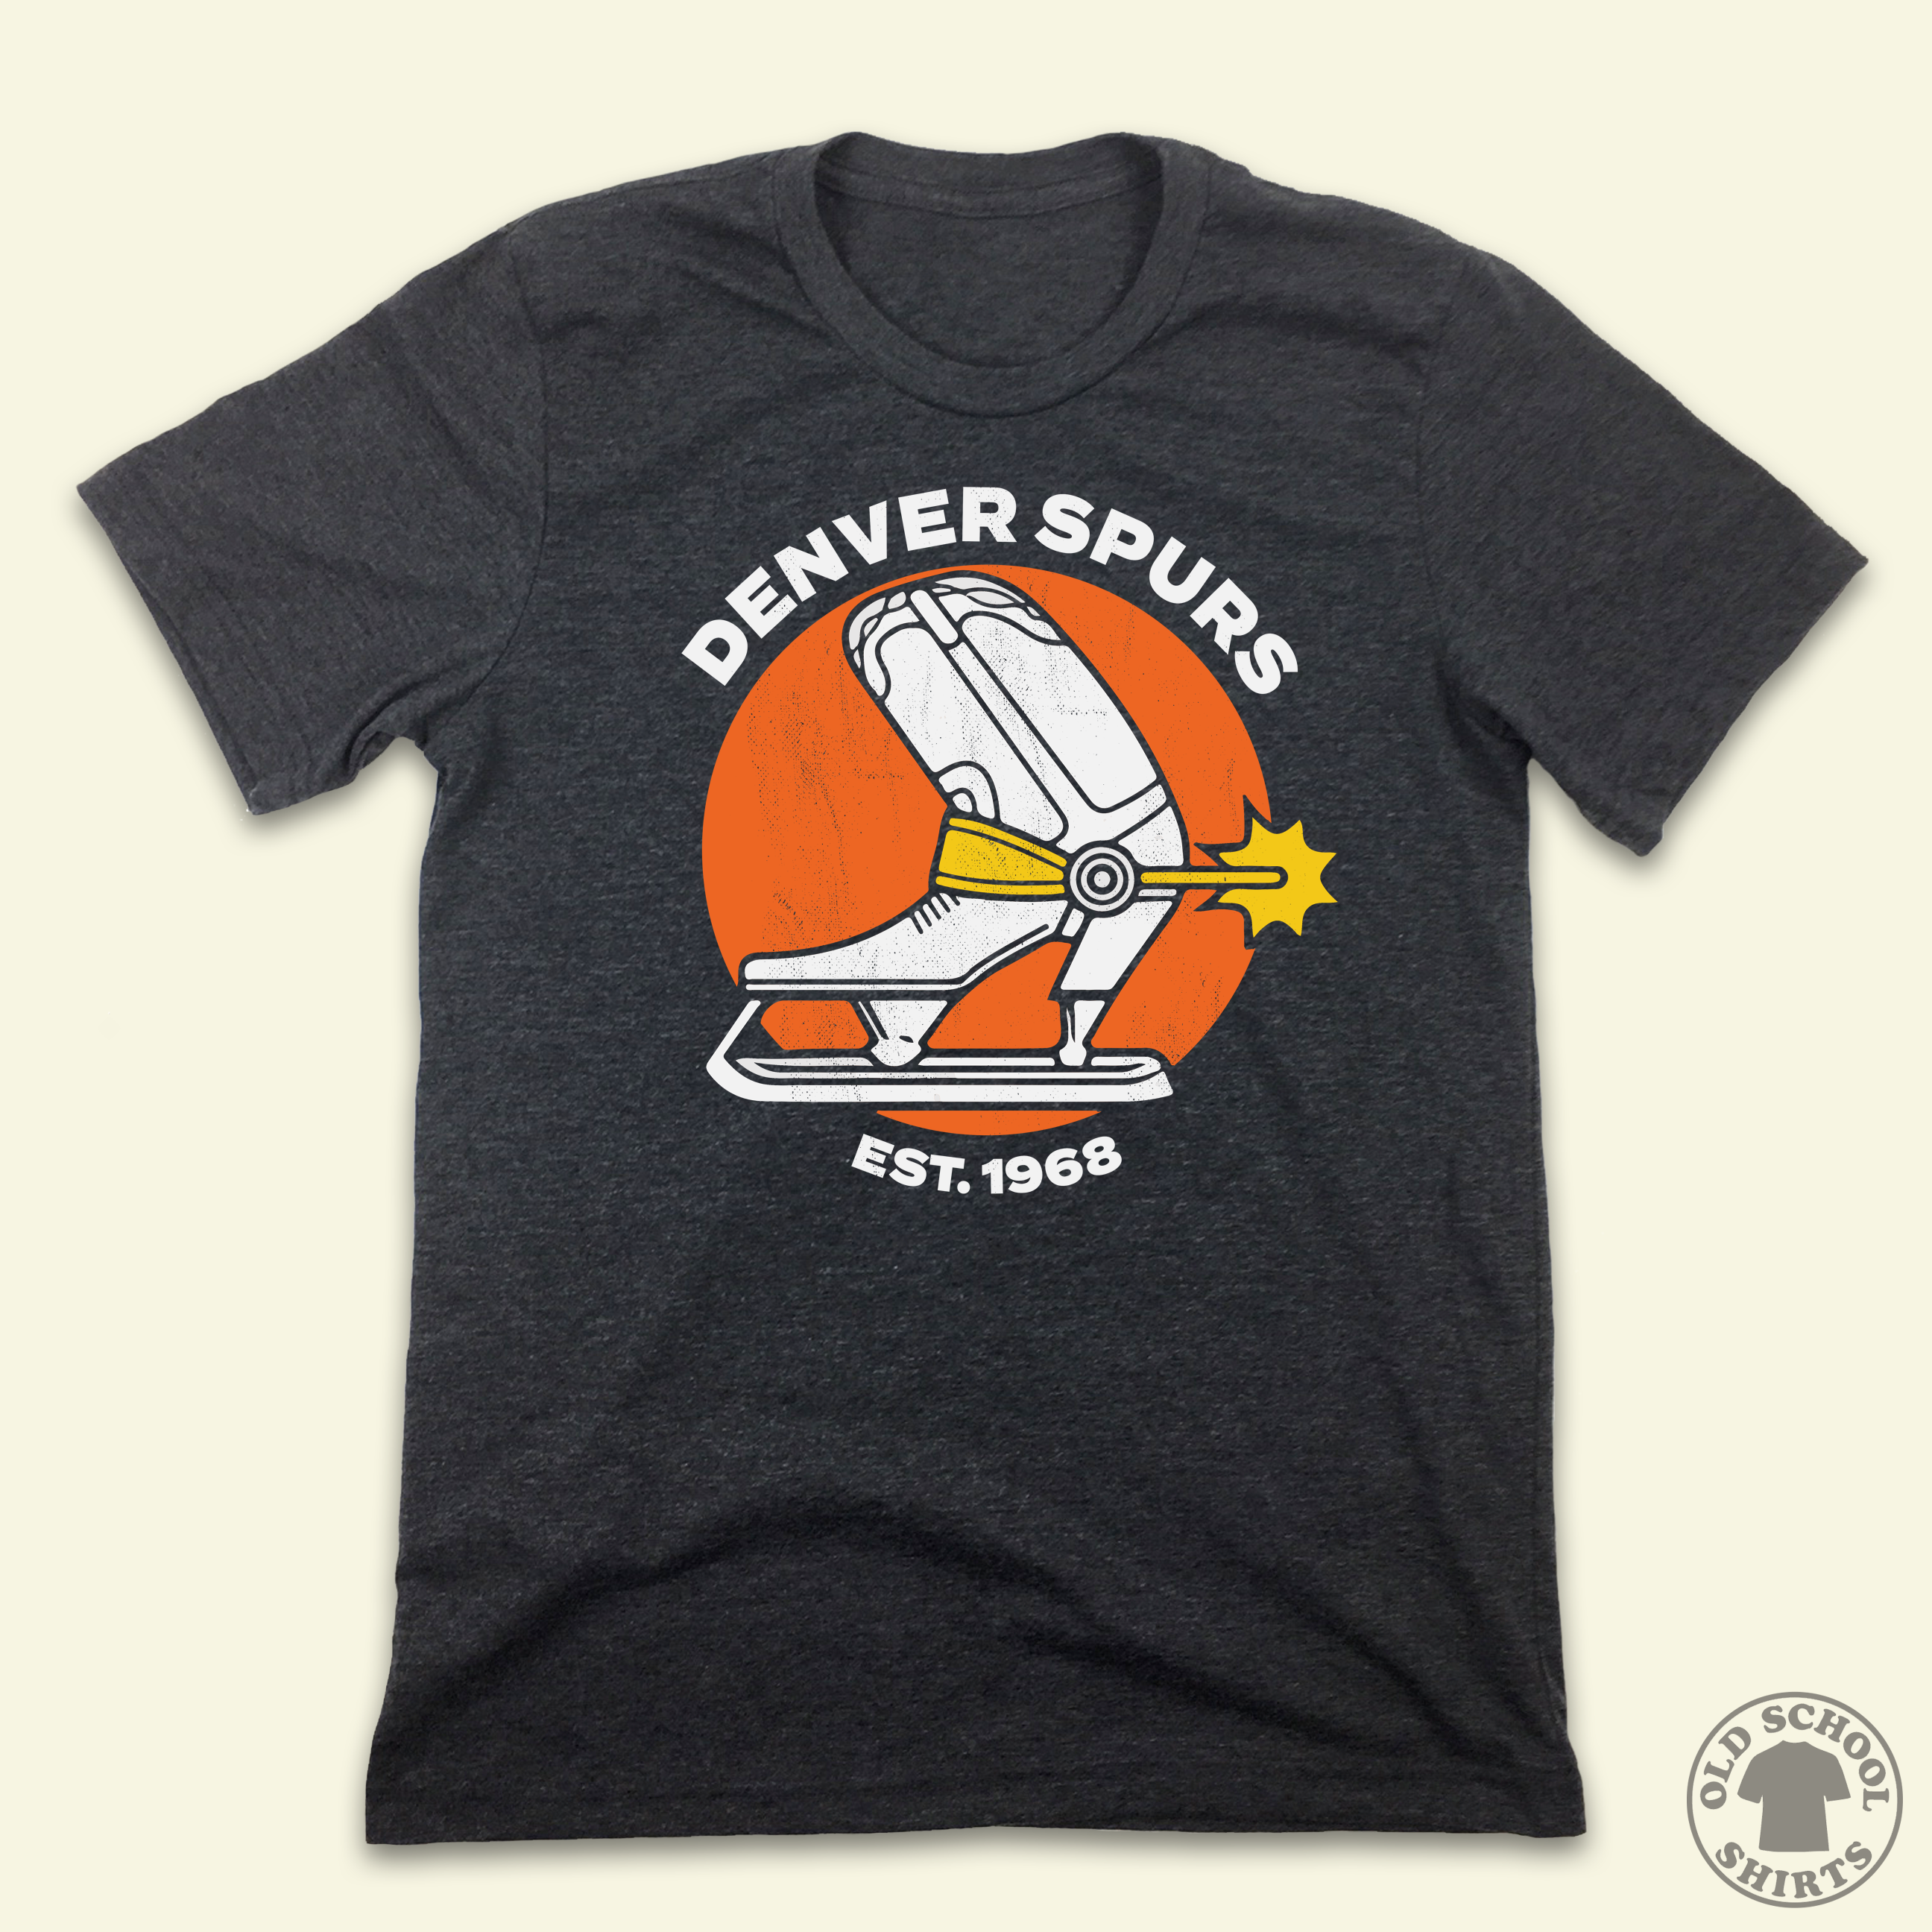 Denver Spurs - In The Clutch- Retro Sports T Shirts